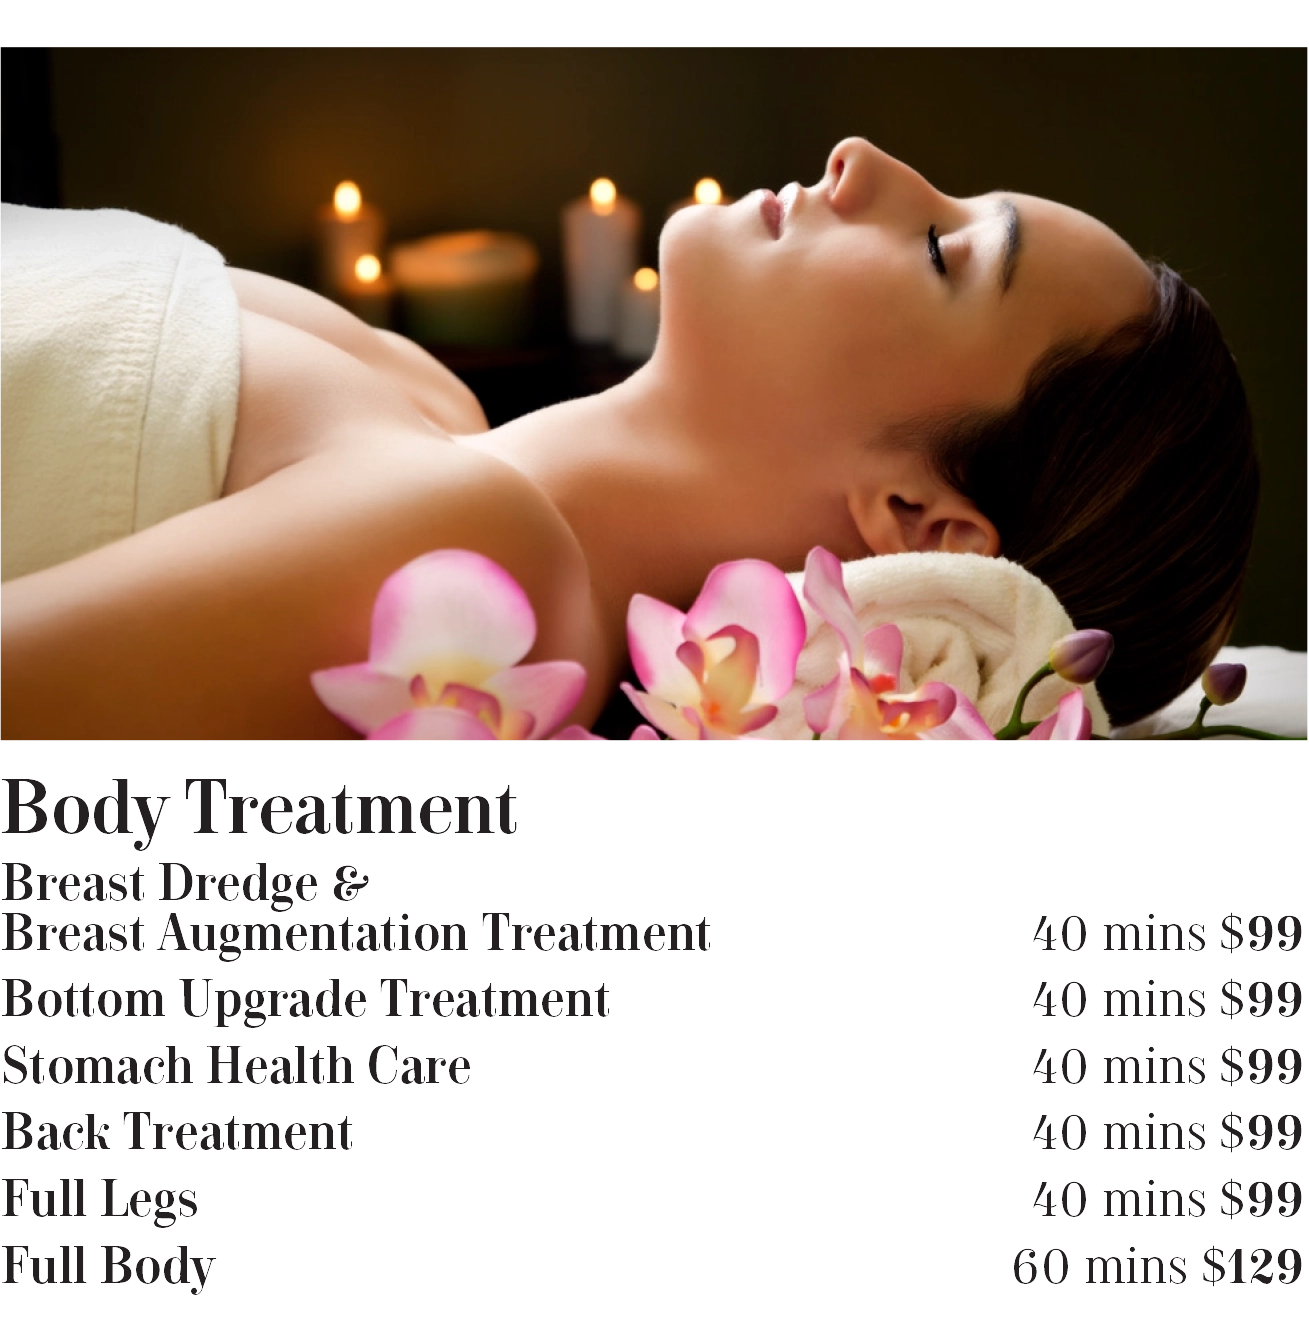 Erin Cosmetic Beauty SPA services